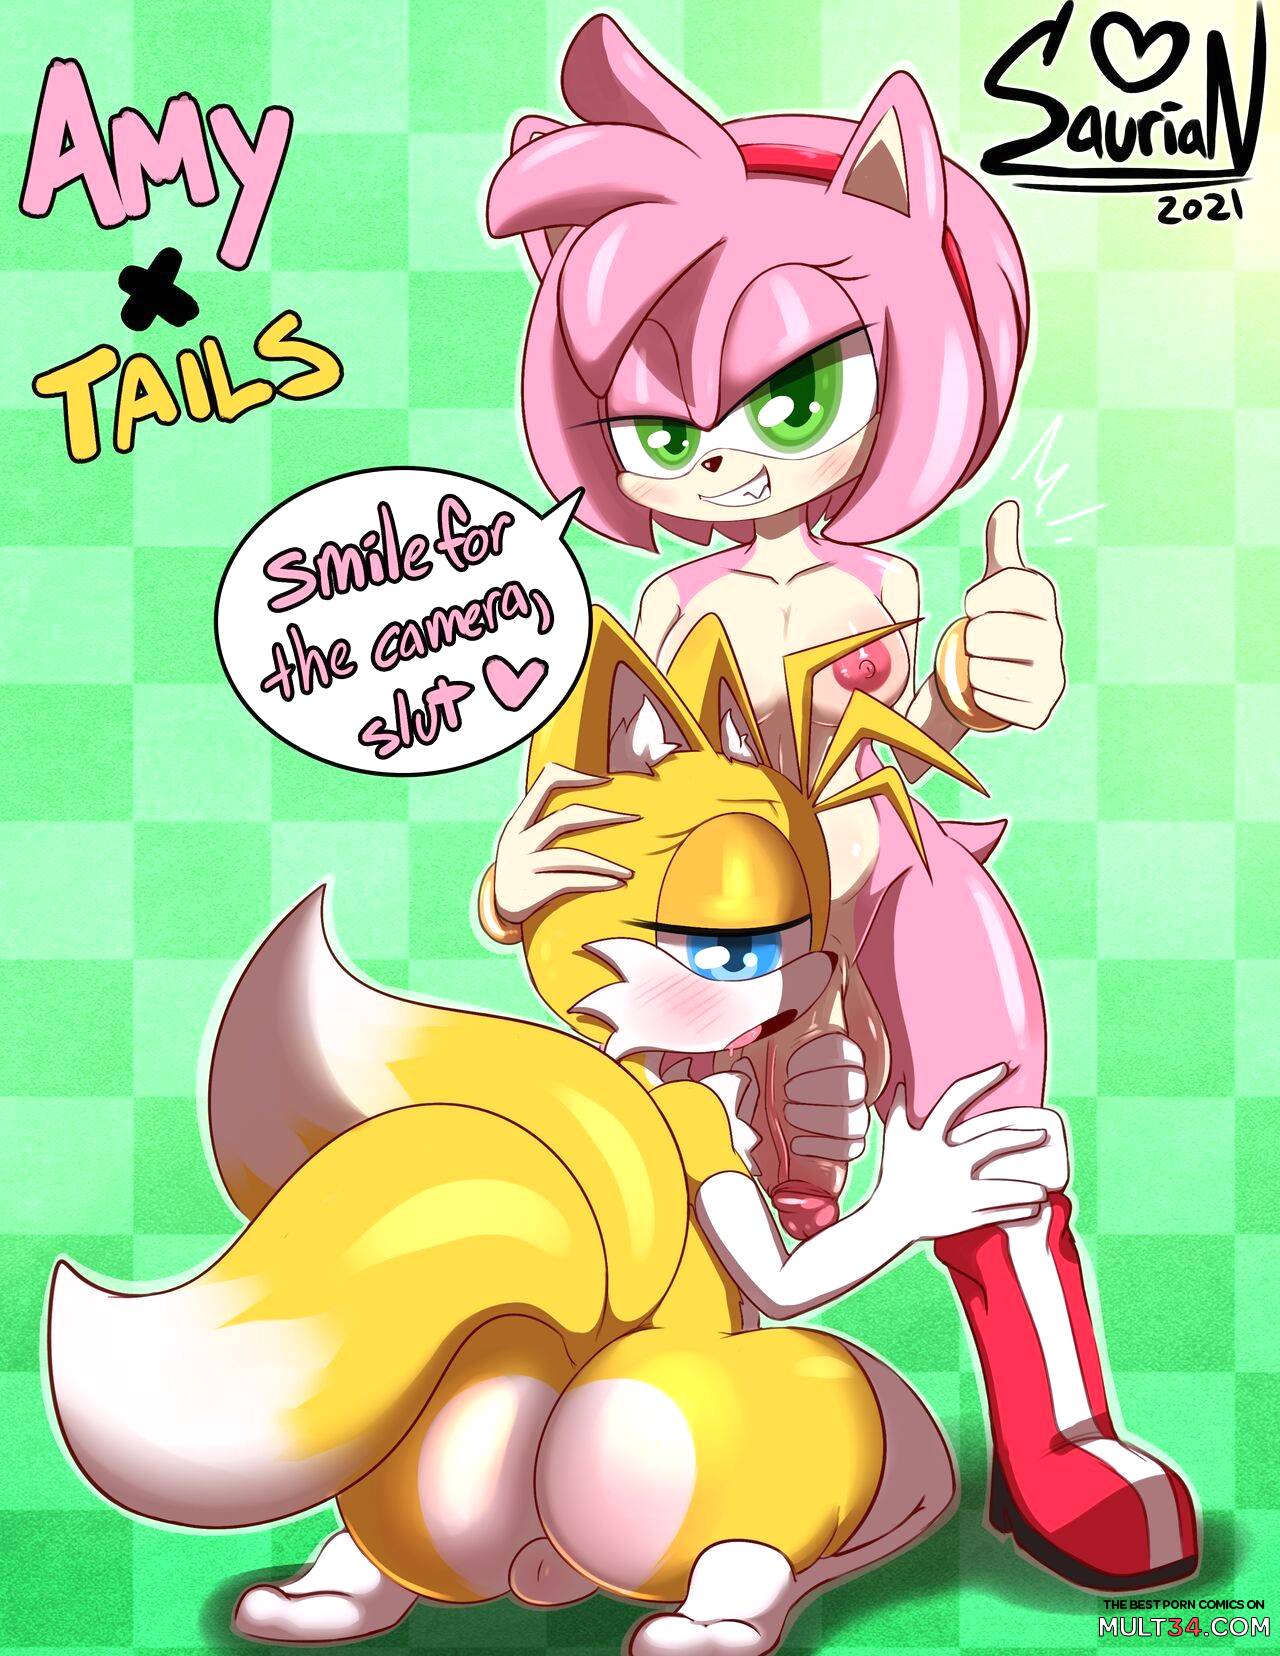 Tails and amy porn comic